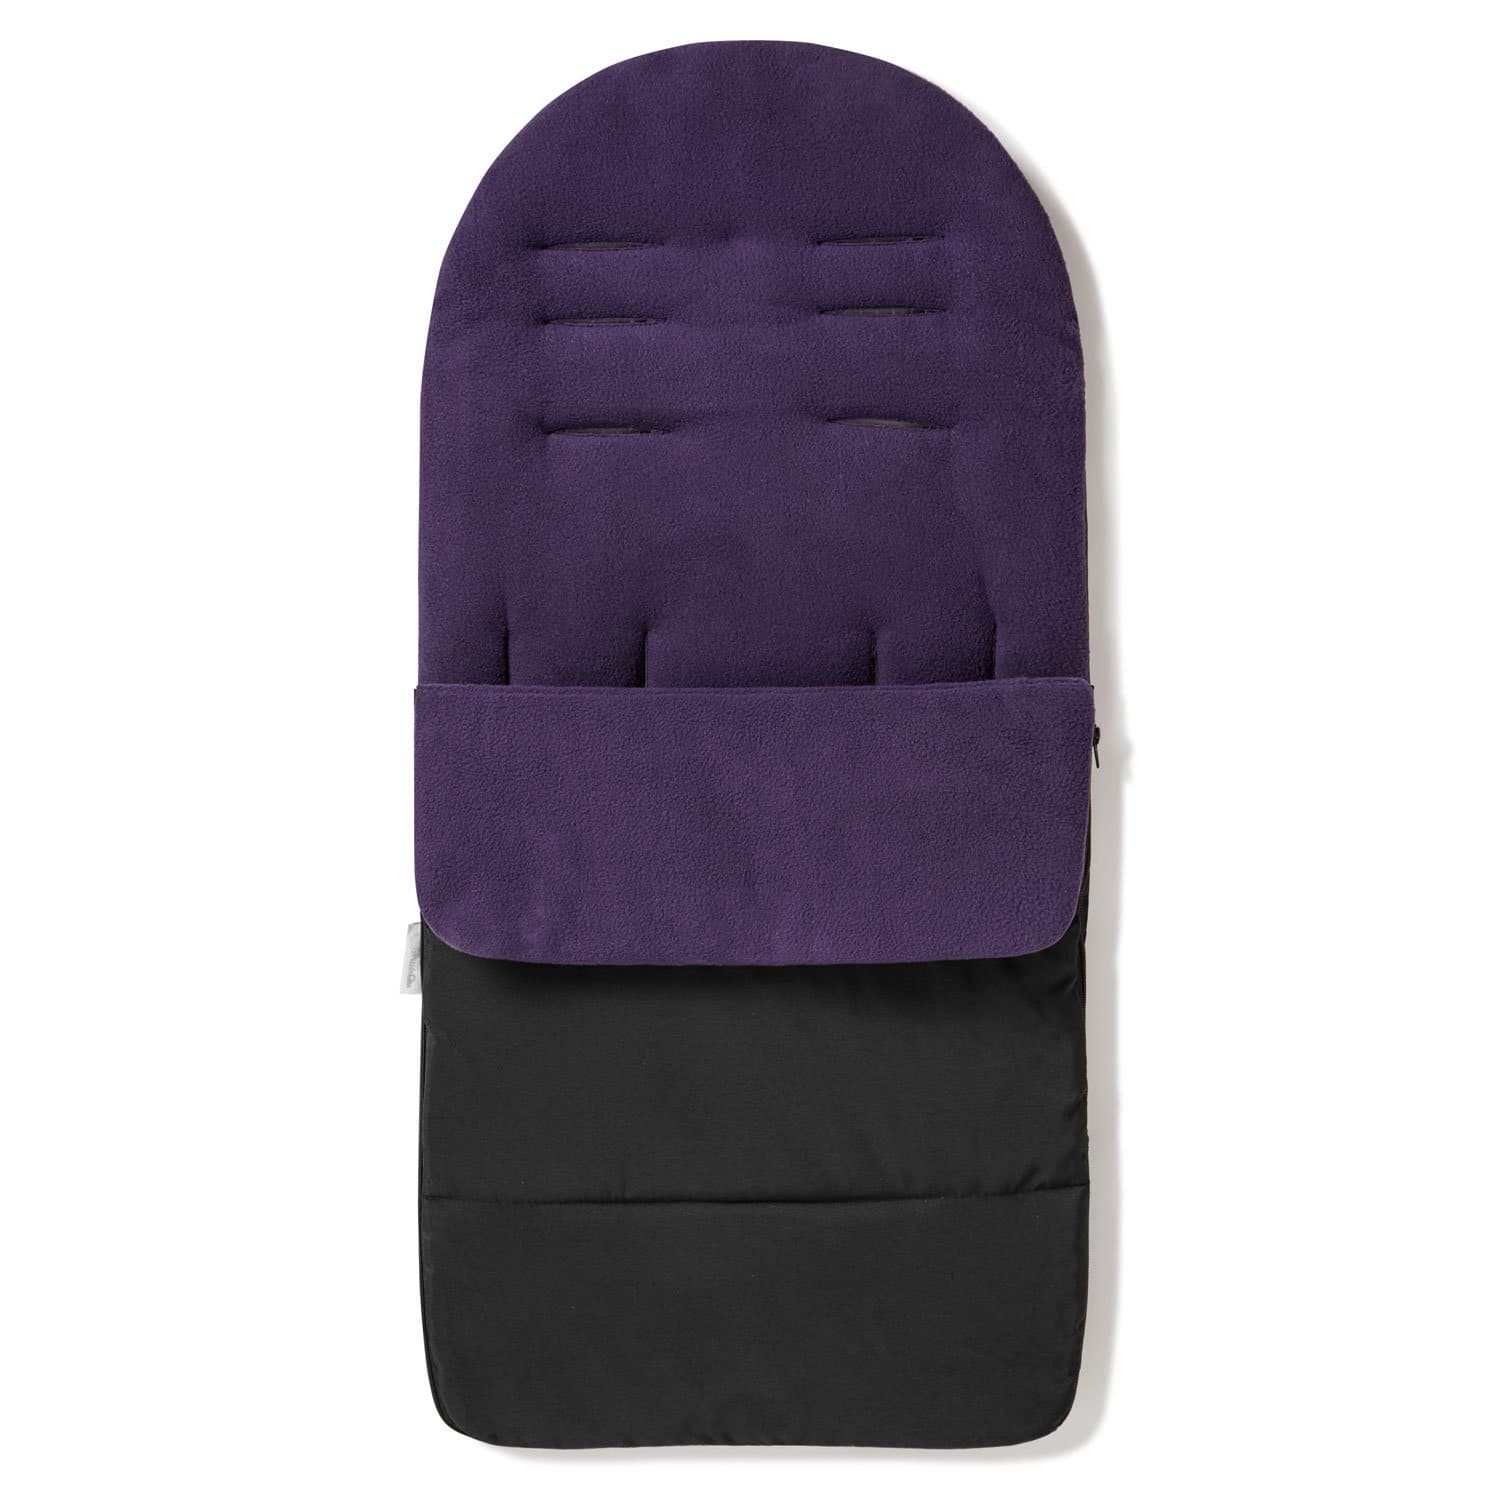 Premium Footmuff / Cosy Toes Compatible with Jane - Plum Purple / Fits All Models | For Your Little One